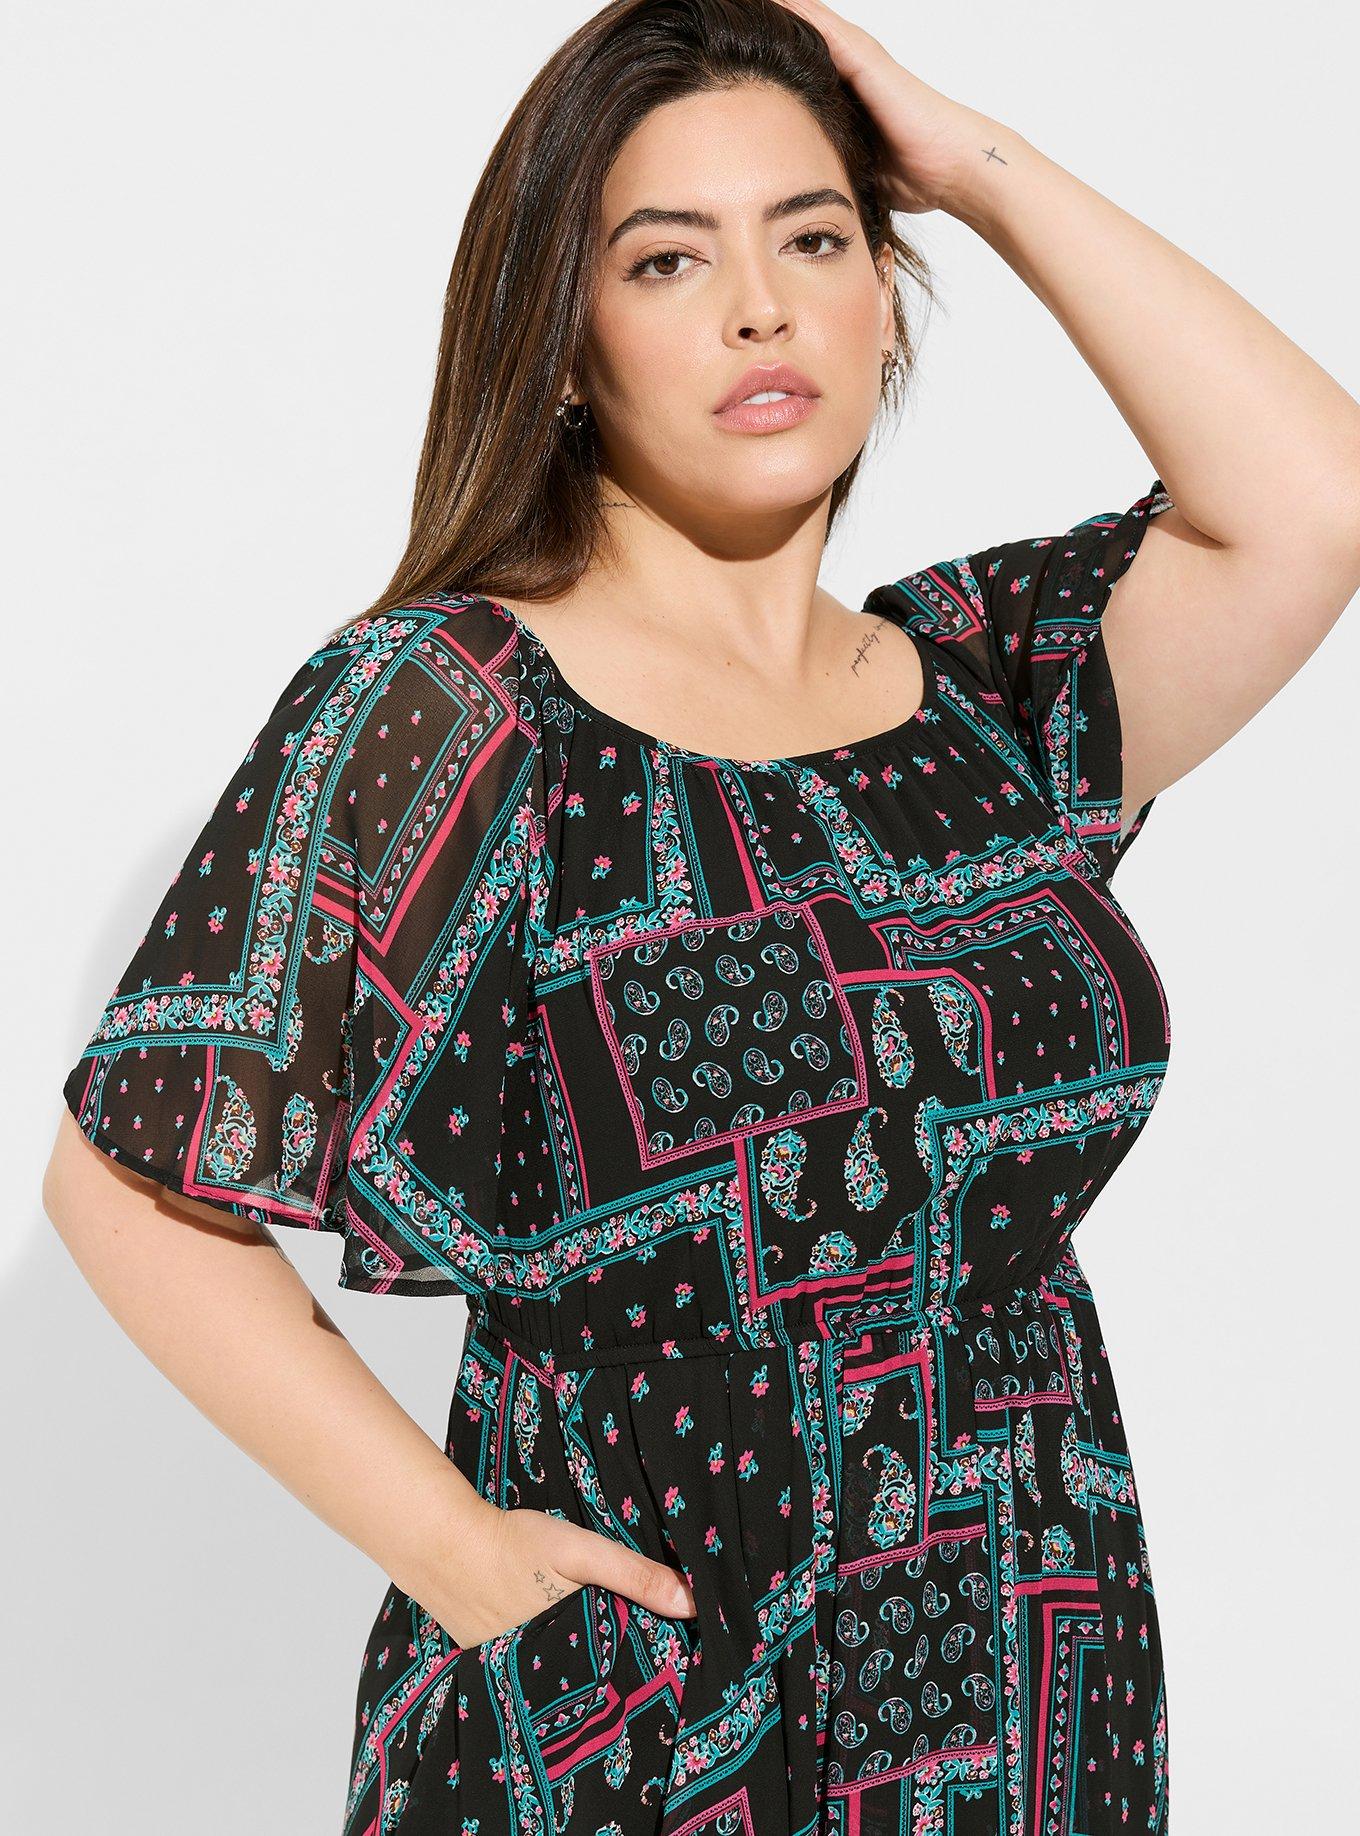 Torrid Plus Size Women's Clothing for sale in Rochester, New York